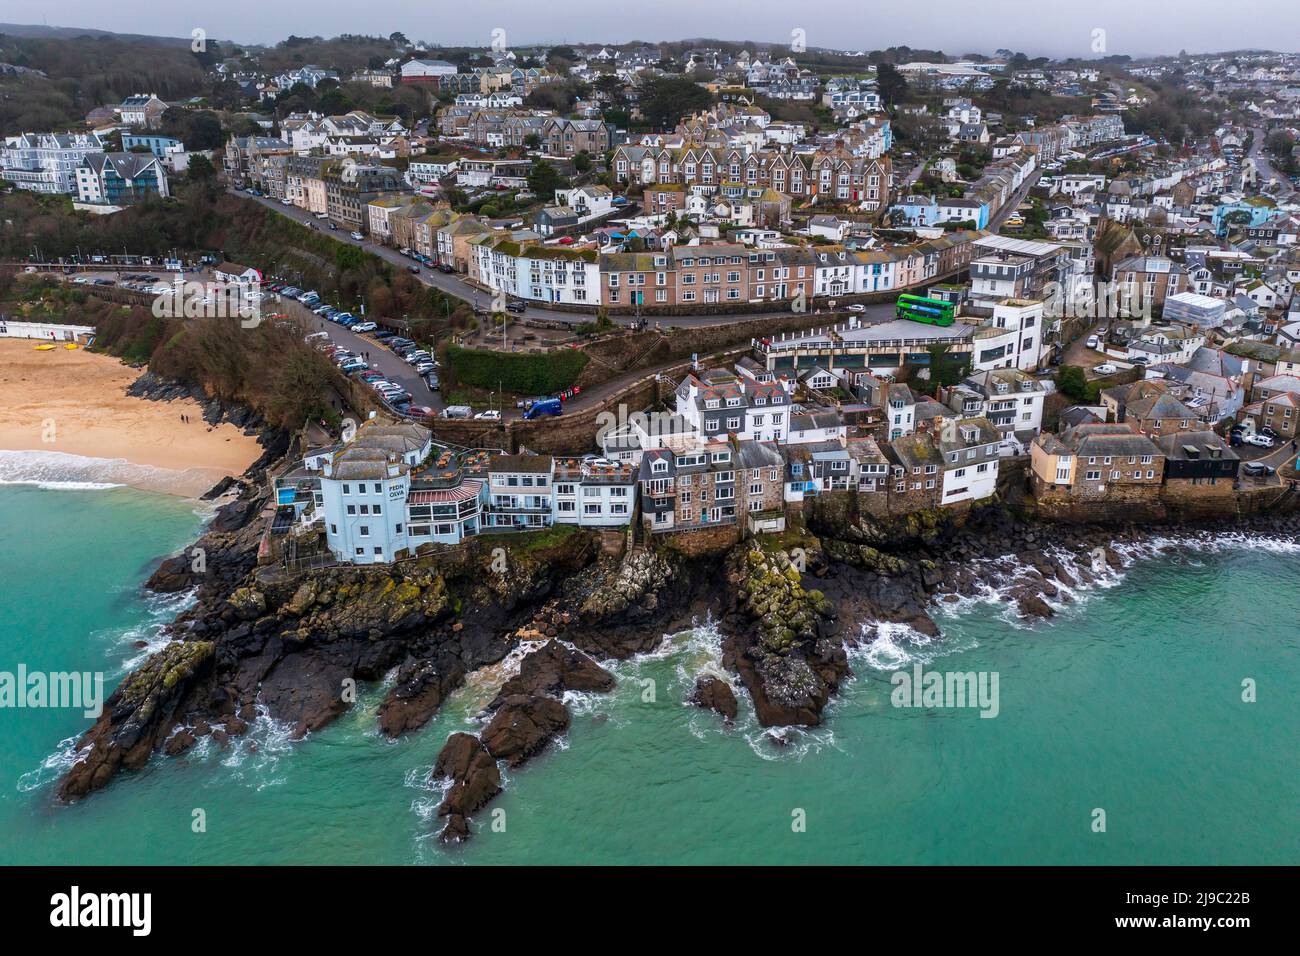 The beautiful seaside town of St Ives in Cornwall. Stock Photo